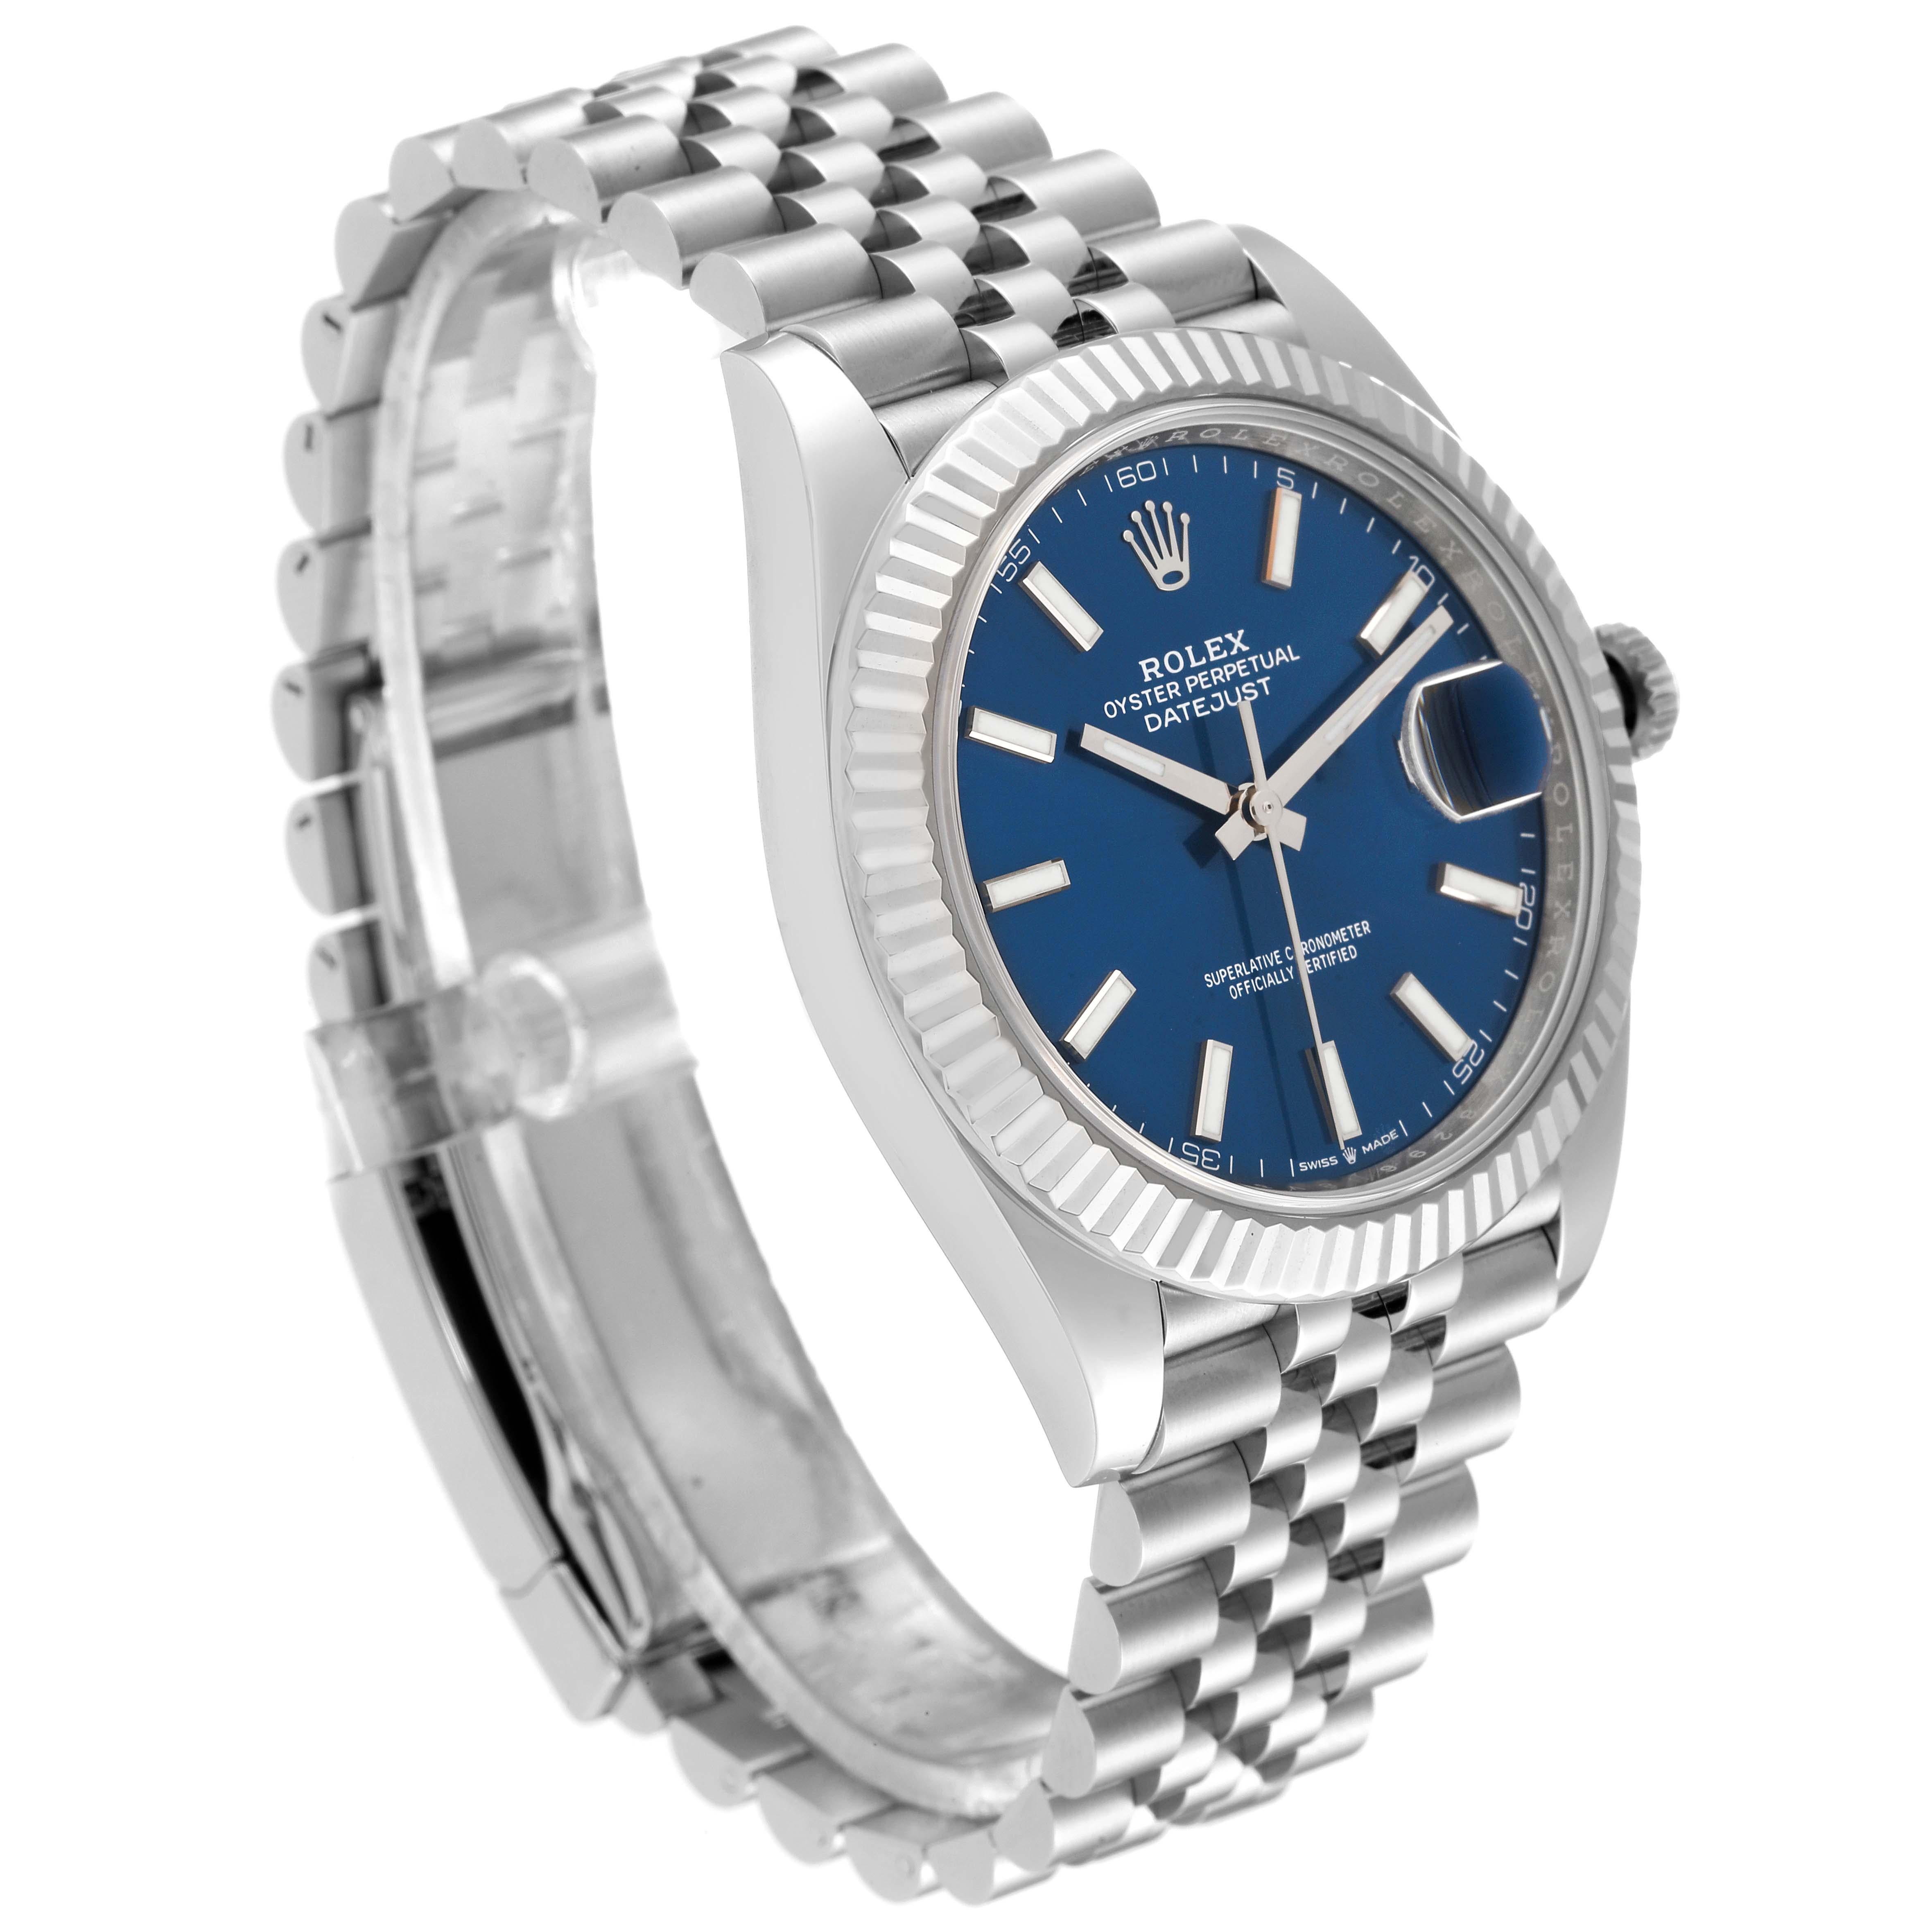 Rolex Datejust 41 Steel White Gold Blue Dial Mens Watch 126334 Box Card 7